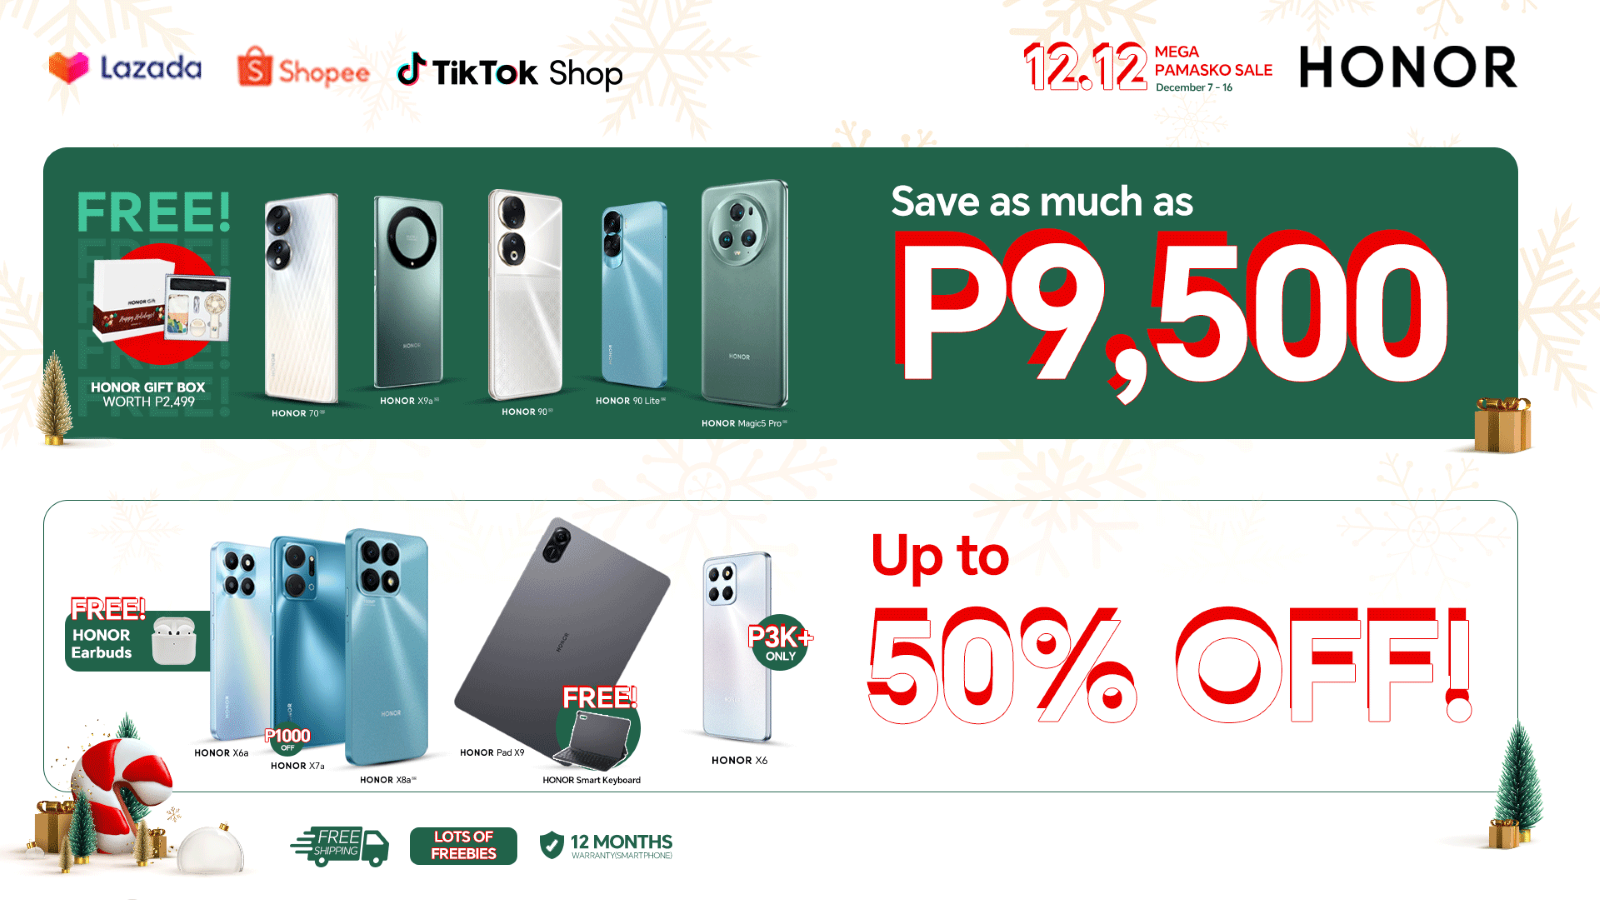 Shop ‘til you drop this HONOR 12.12 Mega Pamasko Sale and Save up to Php 9,500! 